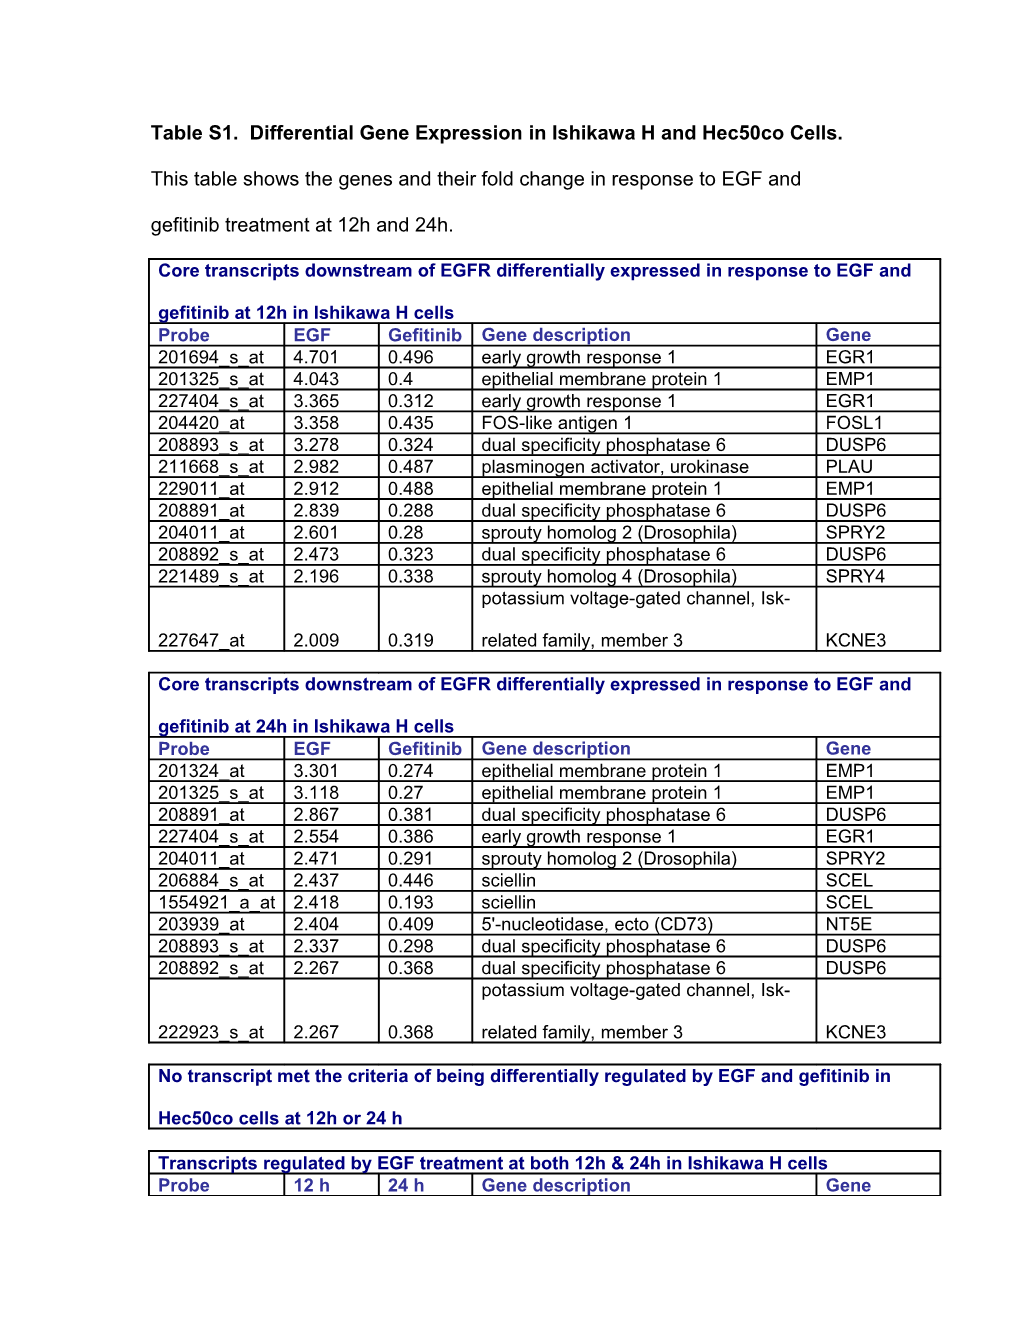 Table 2 - Differential Gene Expression in Ishikawa H and Hec50co Cells